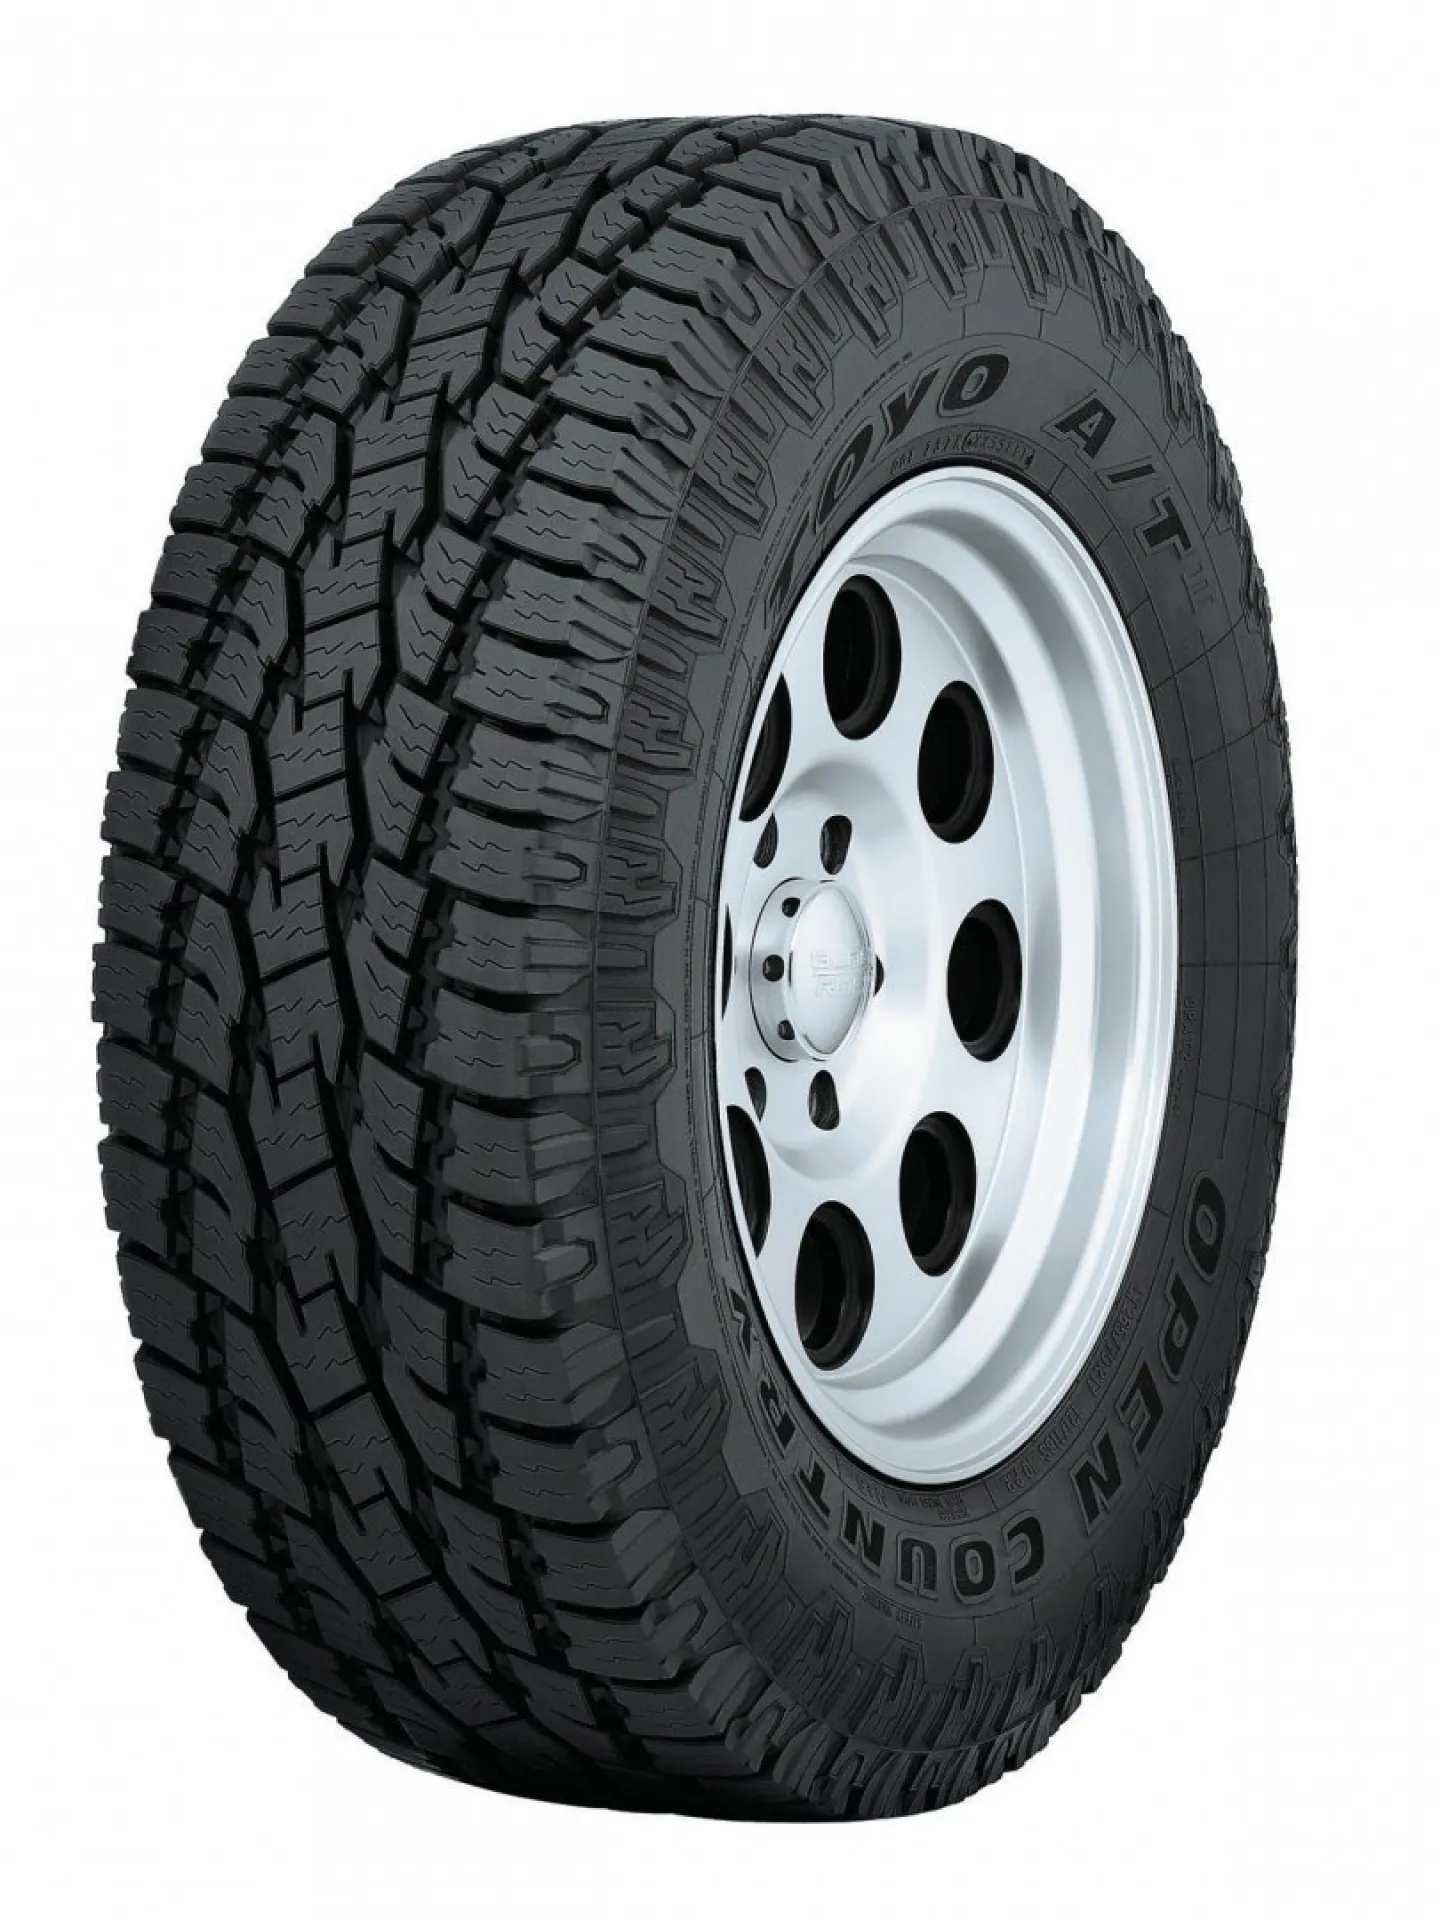 Toyo Open Country A/T + 265/75R16 119/116S 2